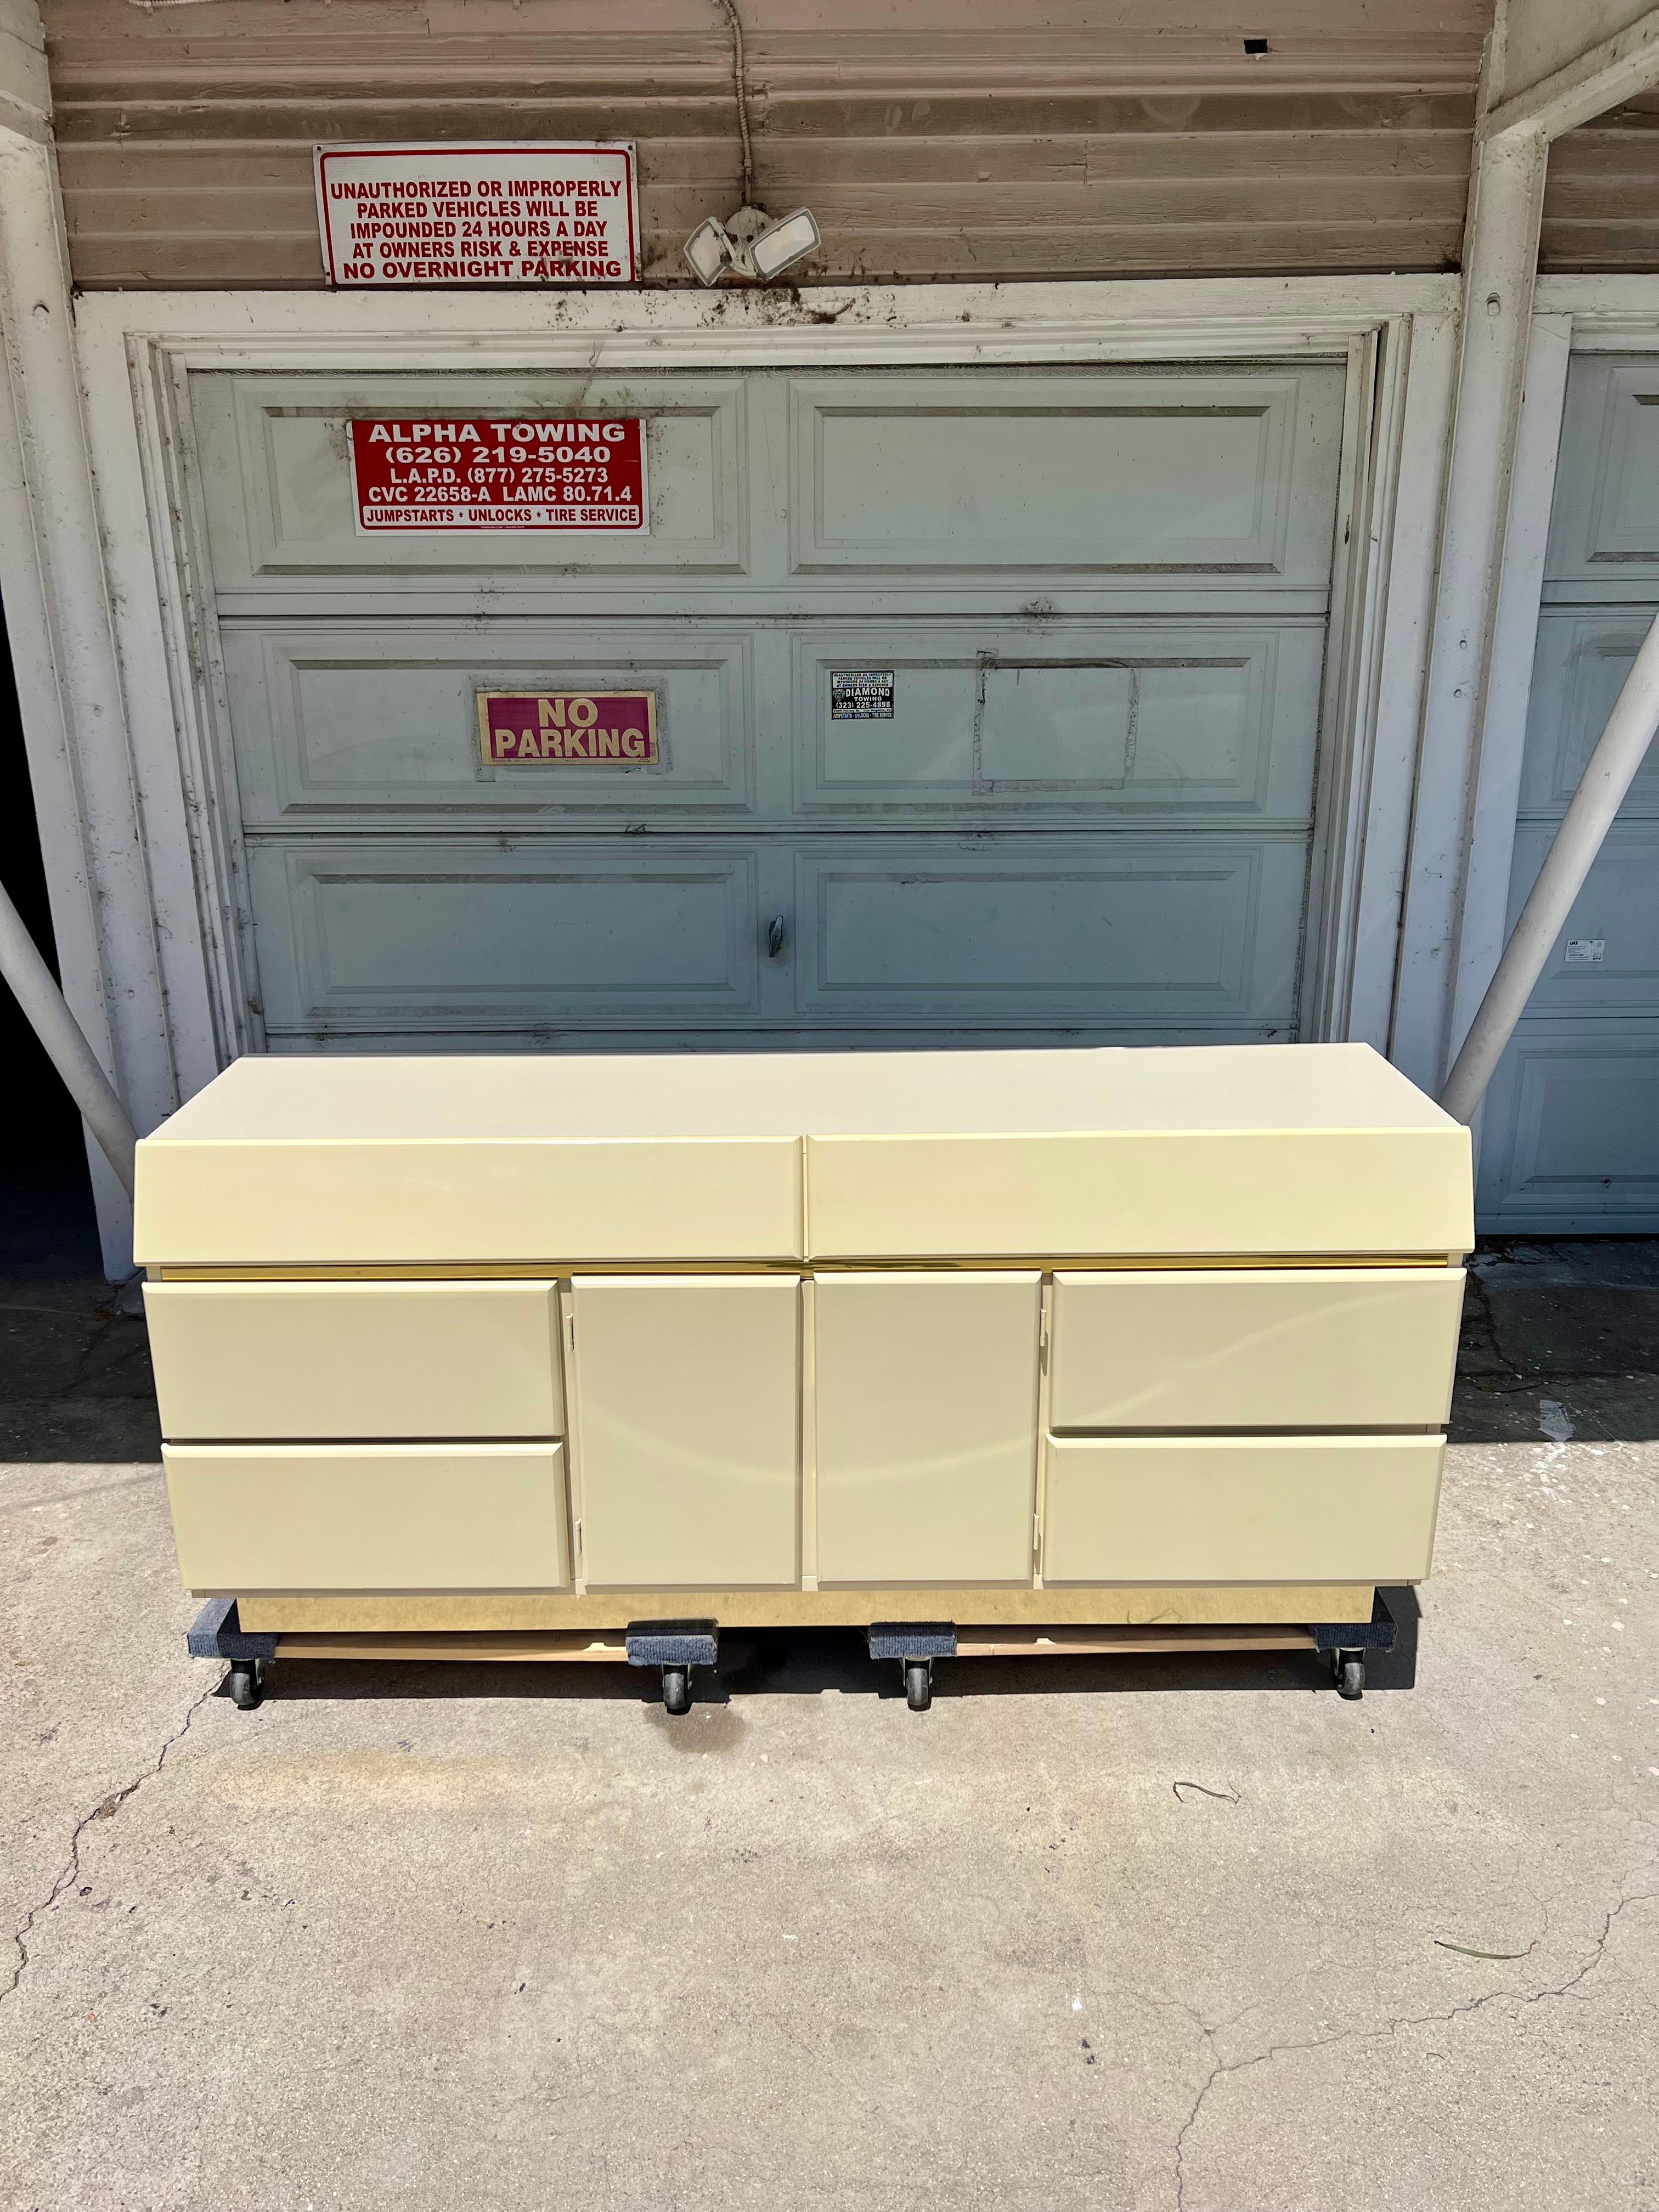 Excellent postmodern lacquered dresser with slant front top drawer. Overall excellent vintage condition. All wood drawer tracks slide well. Dresser is equipped with 8 drawers, 2 in the center behind doors, providing ample storage. Any small lacquer